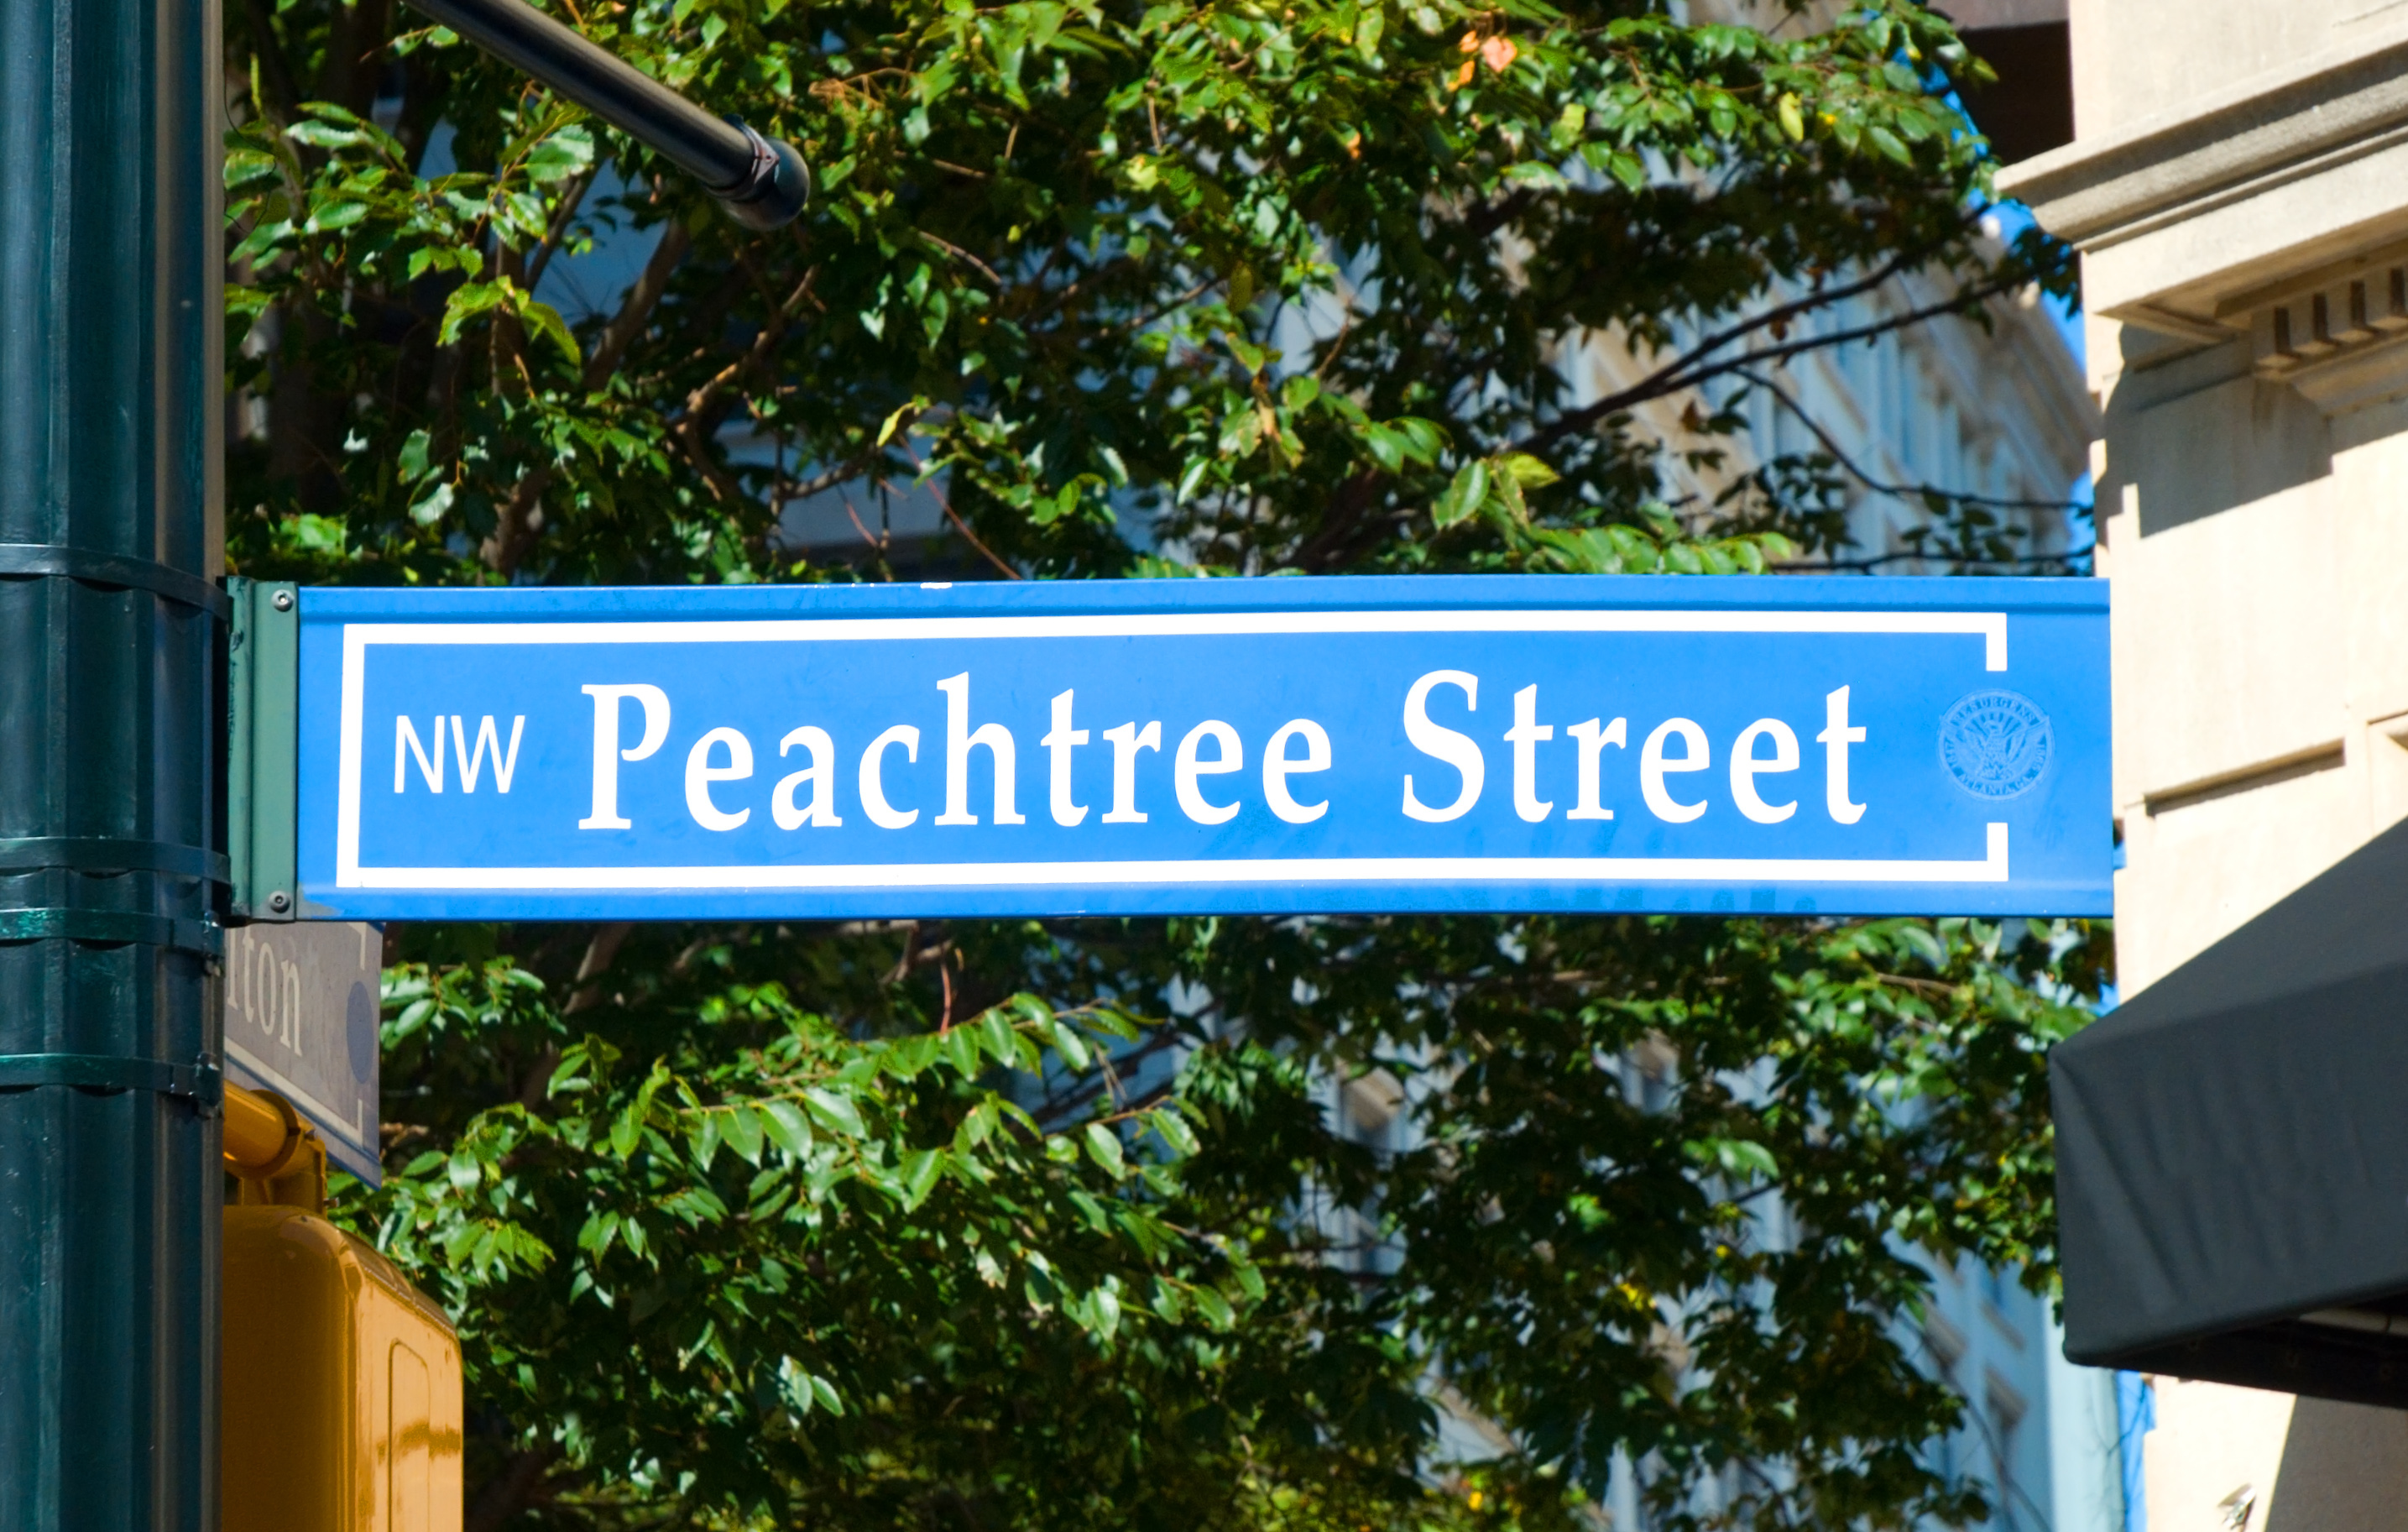 What You Need to Know About Atlanta's Famous Peachtree Streets